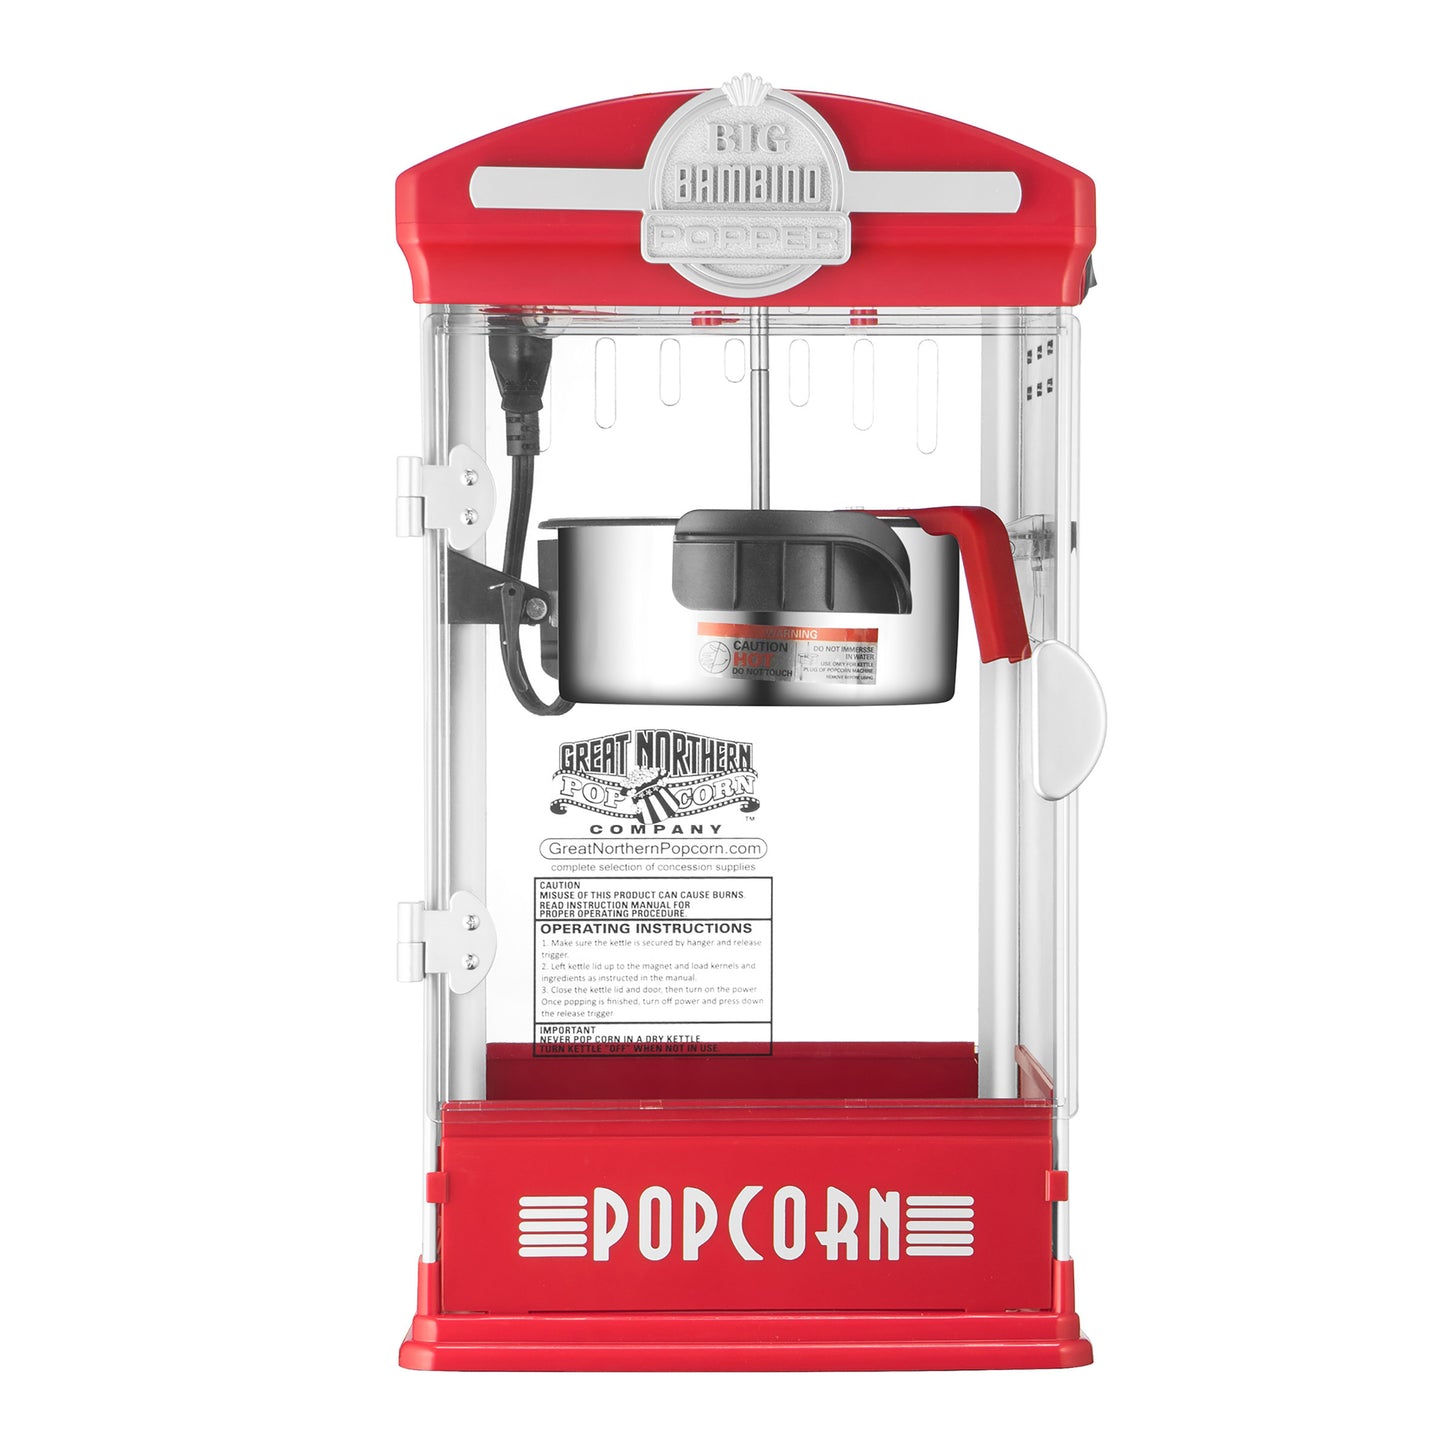 Big Bambino Countertop Popcorn Machine with 4 Ounce Kettle - Red